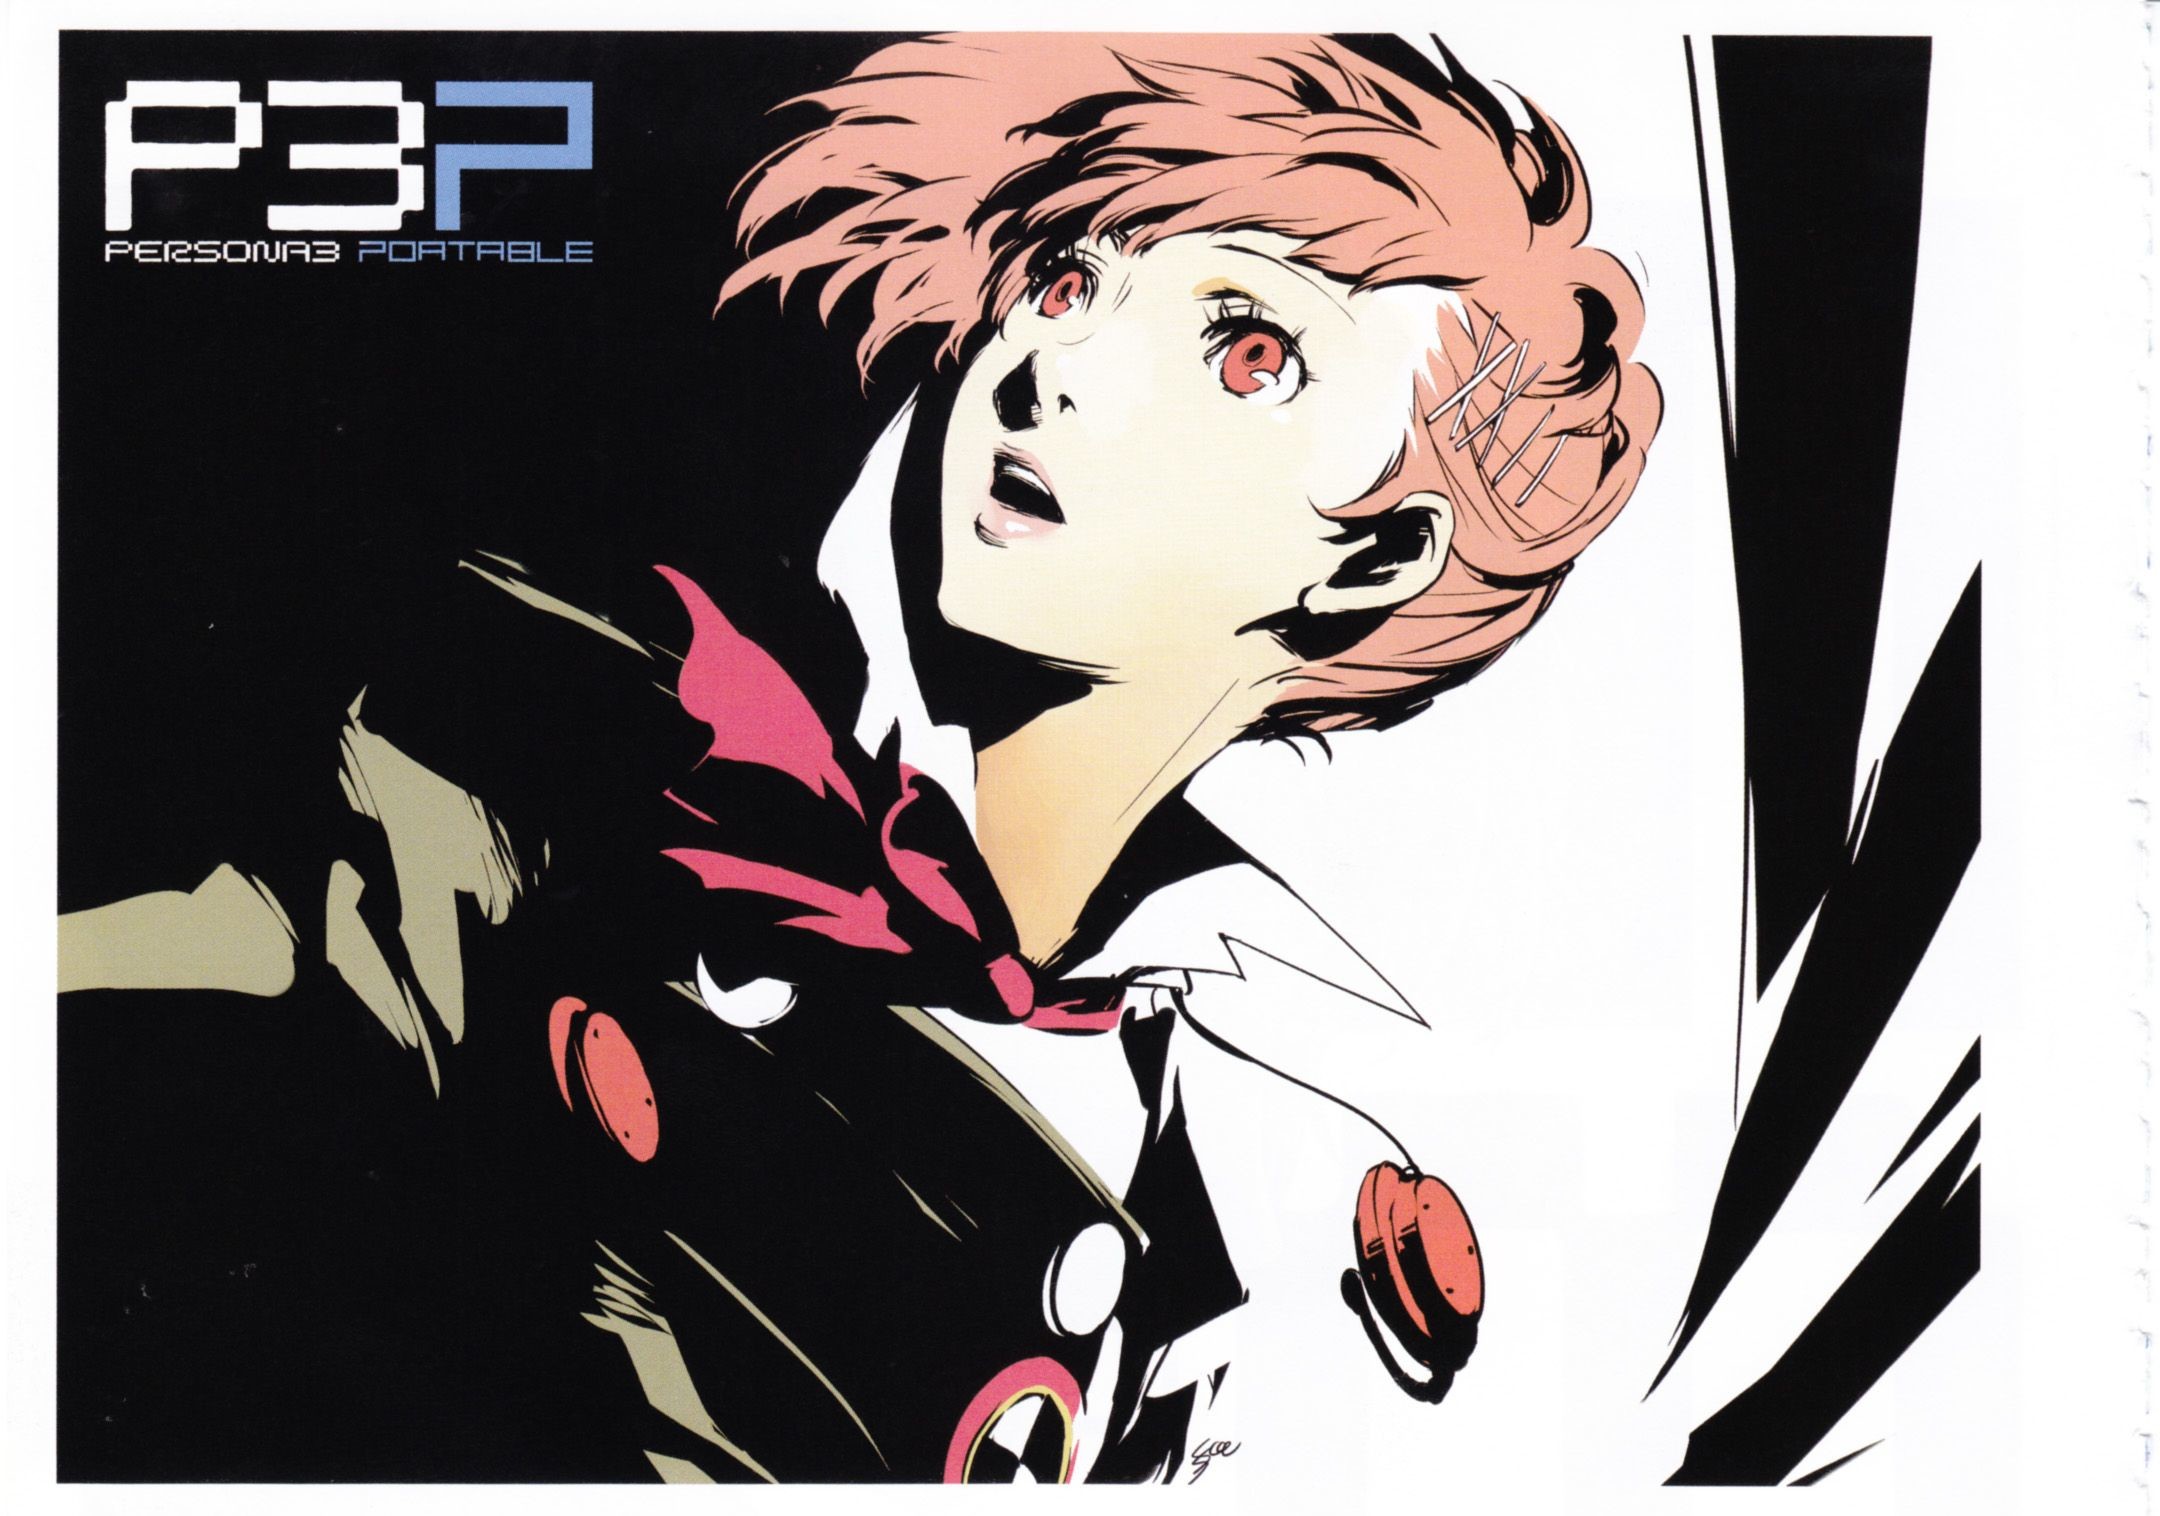 2160x1516 ... download Female Protagonist (PERSONA 3) image